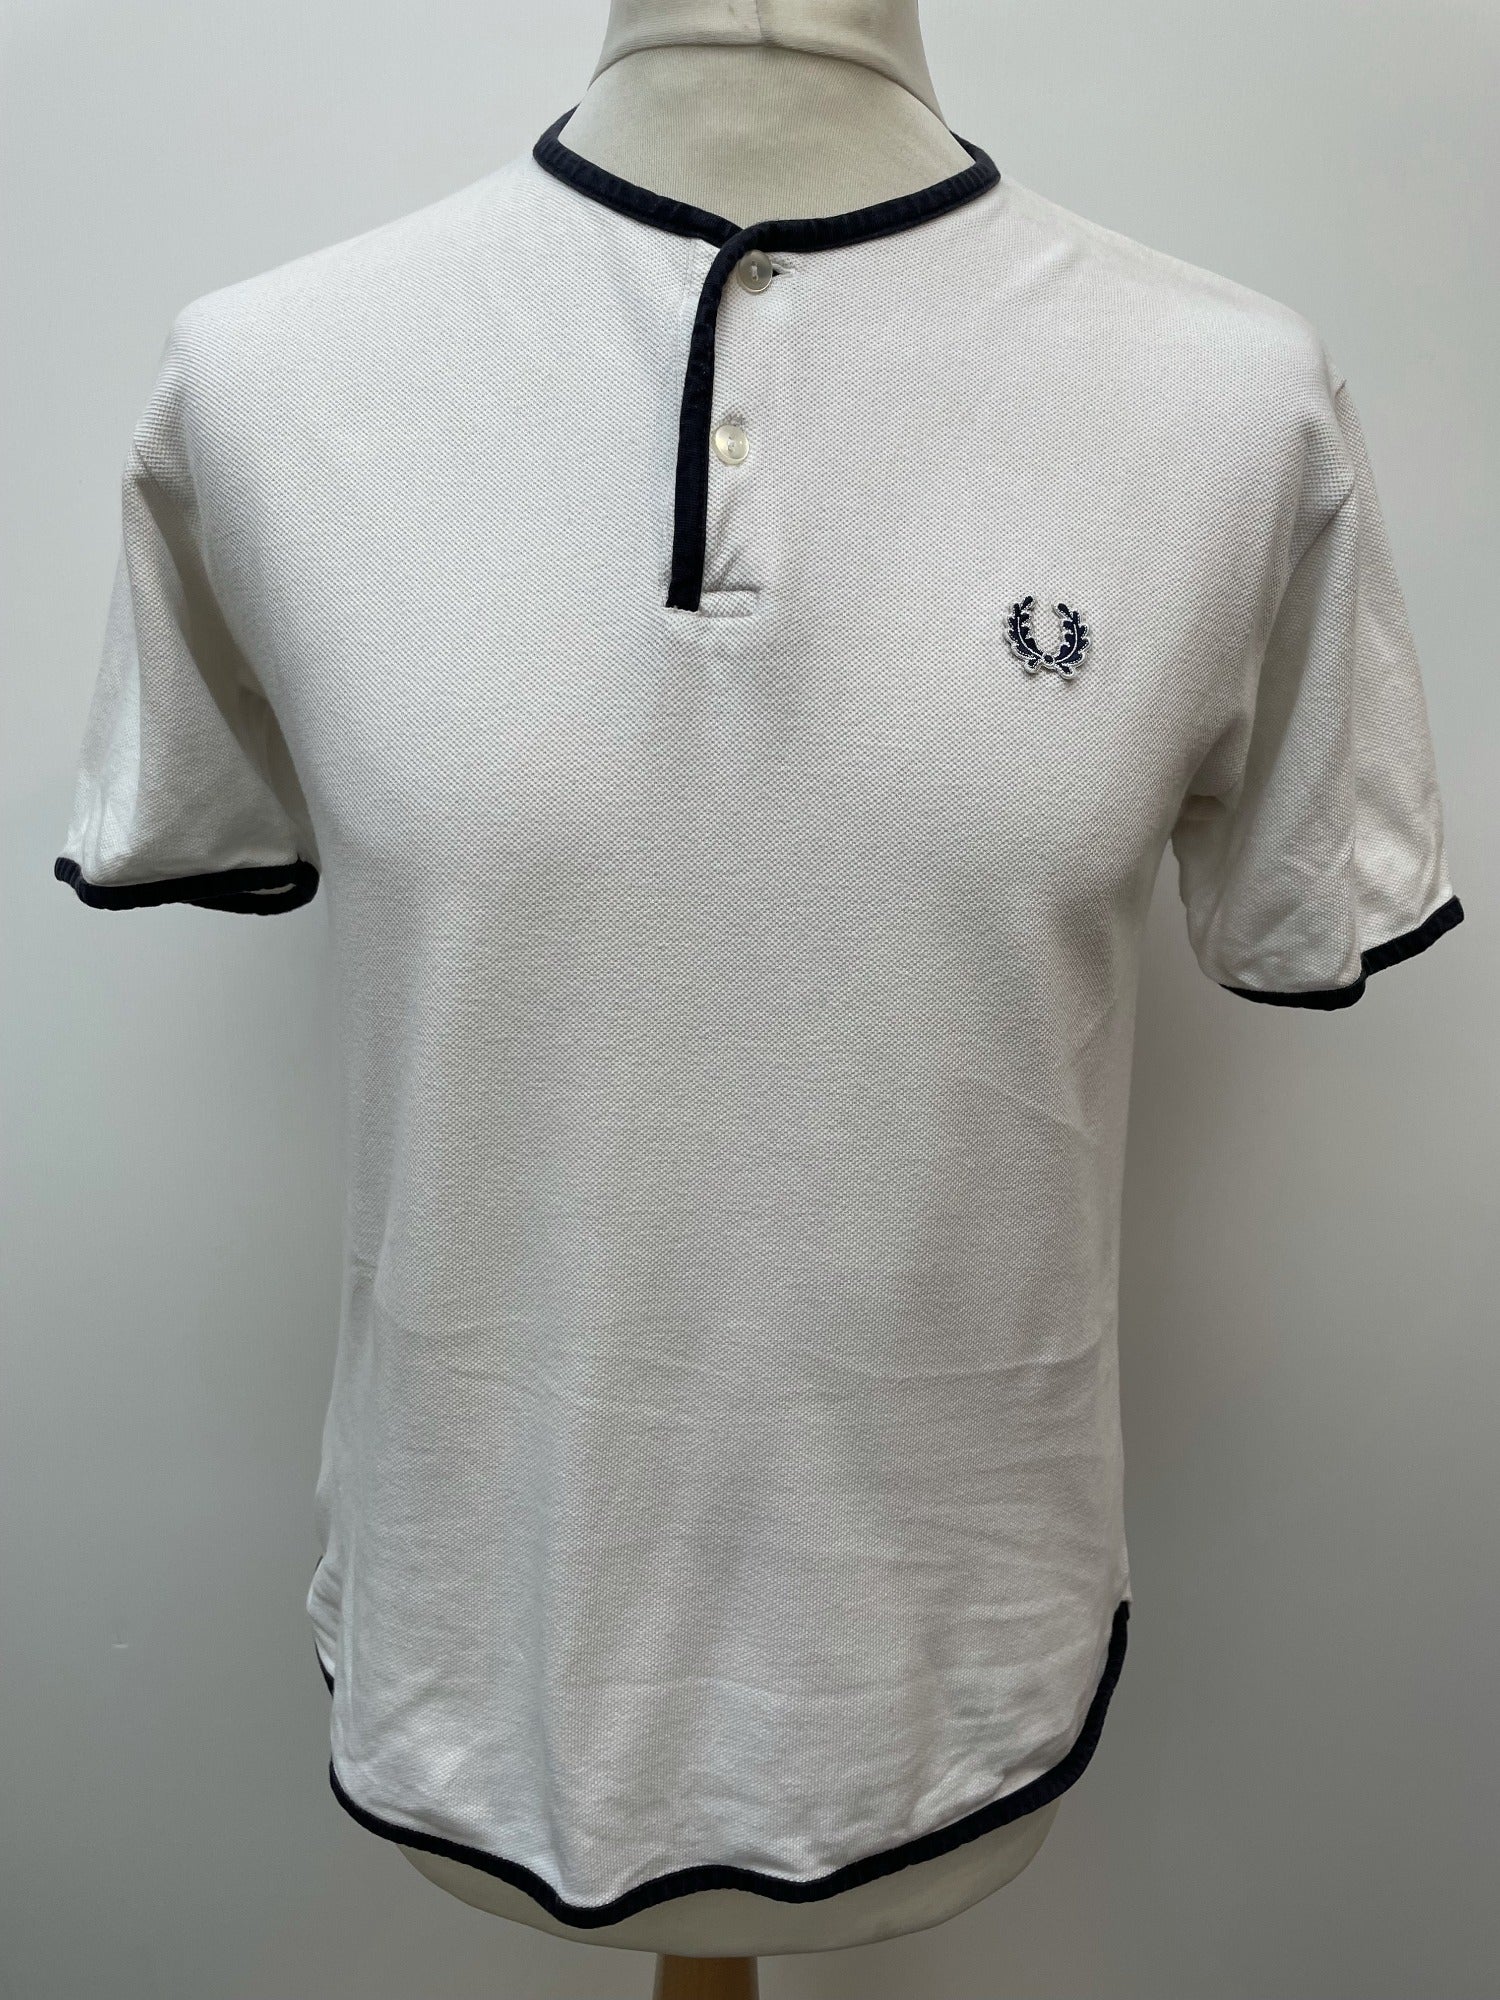 Limited Edition Paul Weller Fred Perry Top - Size S - Urban Village ...